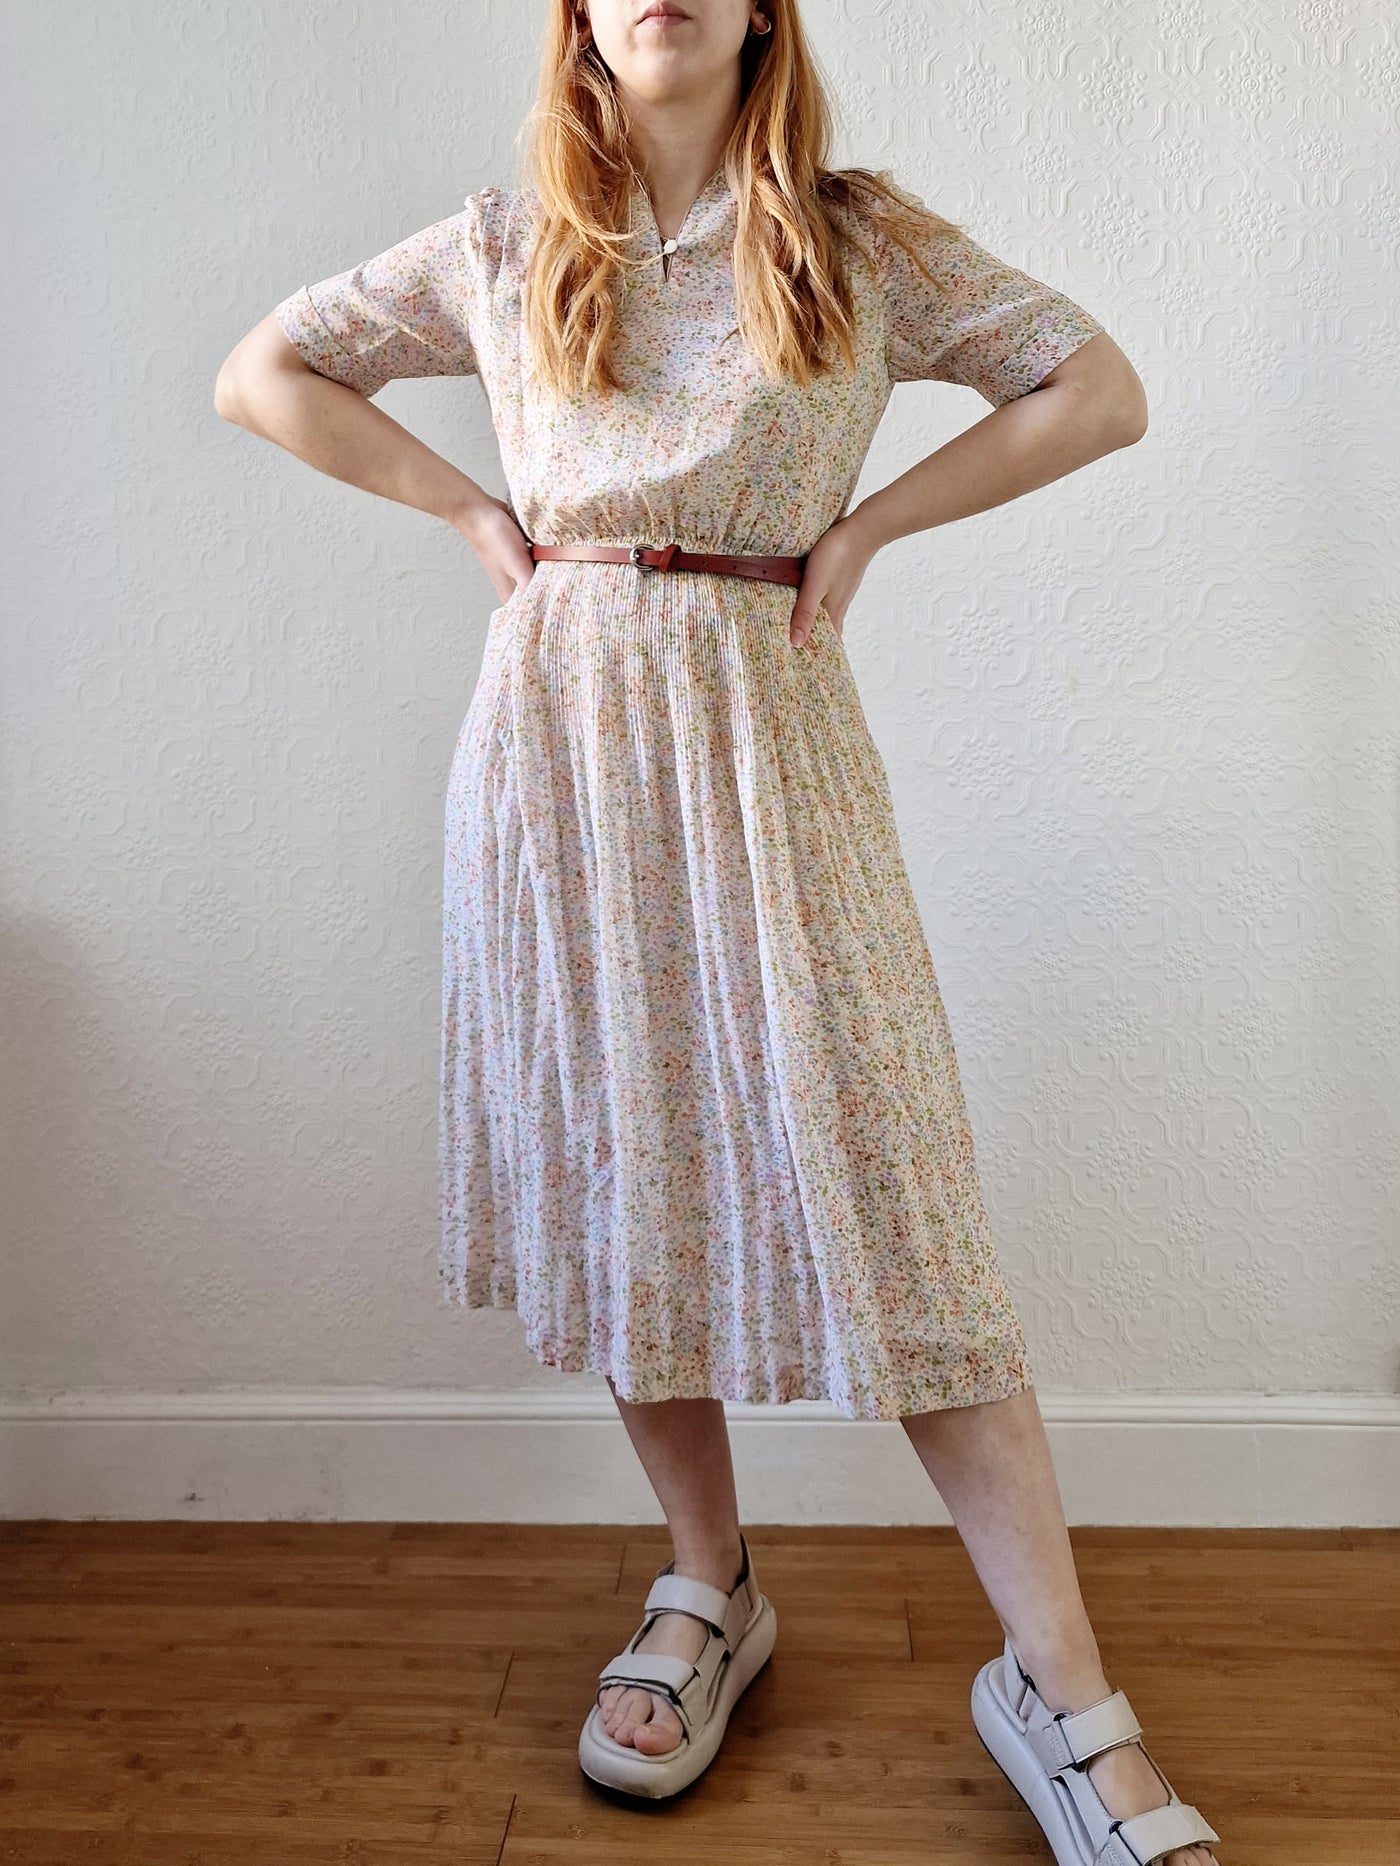 Vintage 80s Romantic Pastel Ditsy Floral Midi Dress with Short Sleeves - S